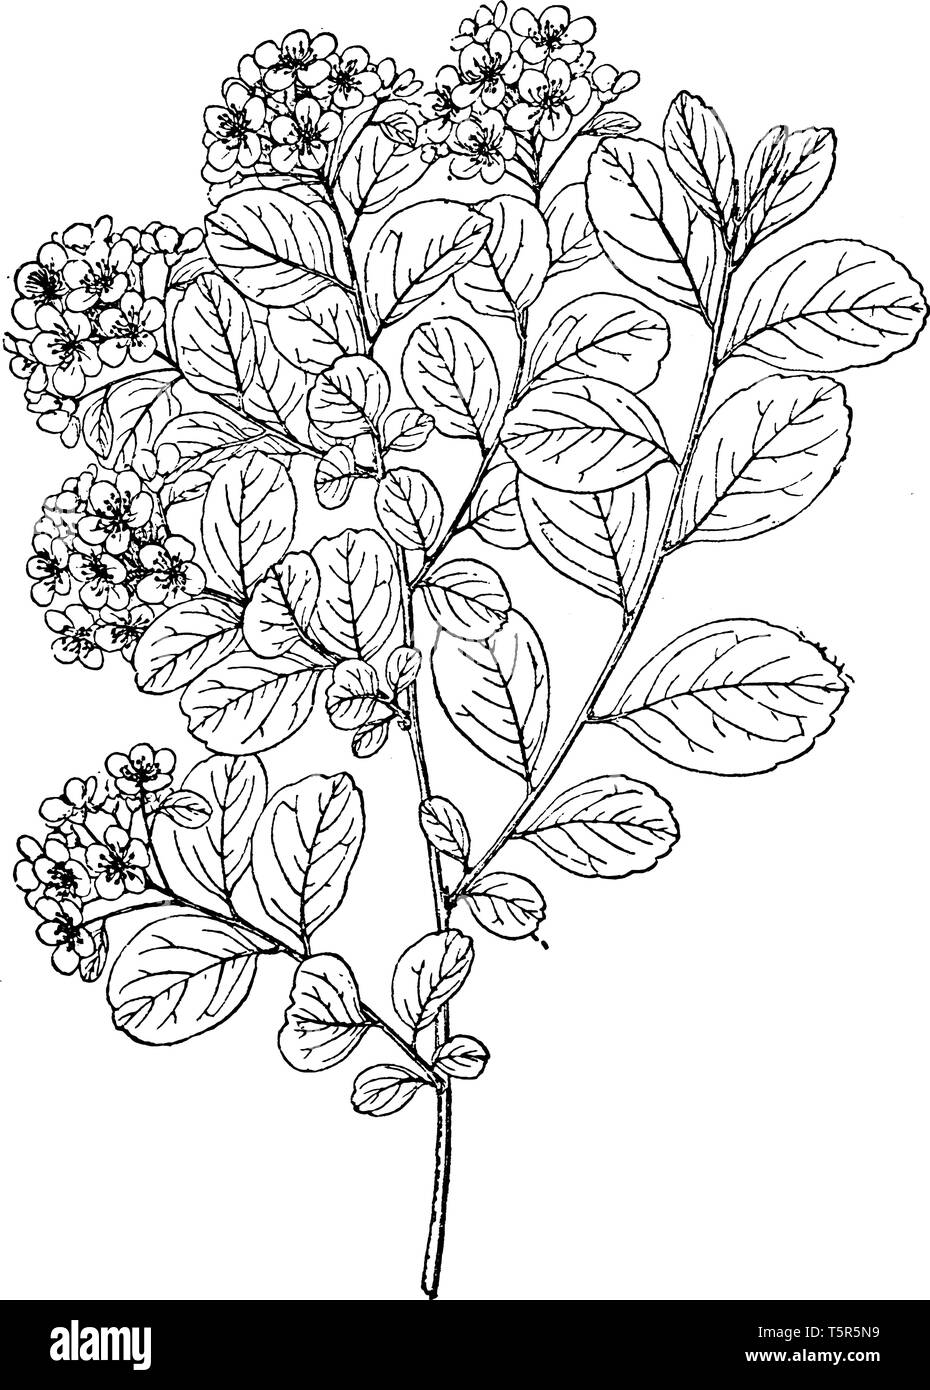 A picture shows branch of Nipponica Spiraea Plant. Leaves are small, pink, flat and having hairs on it and there is bunch of flowers at its apex. It i Stock Vector